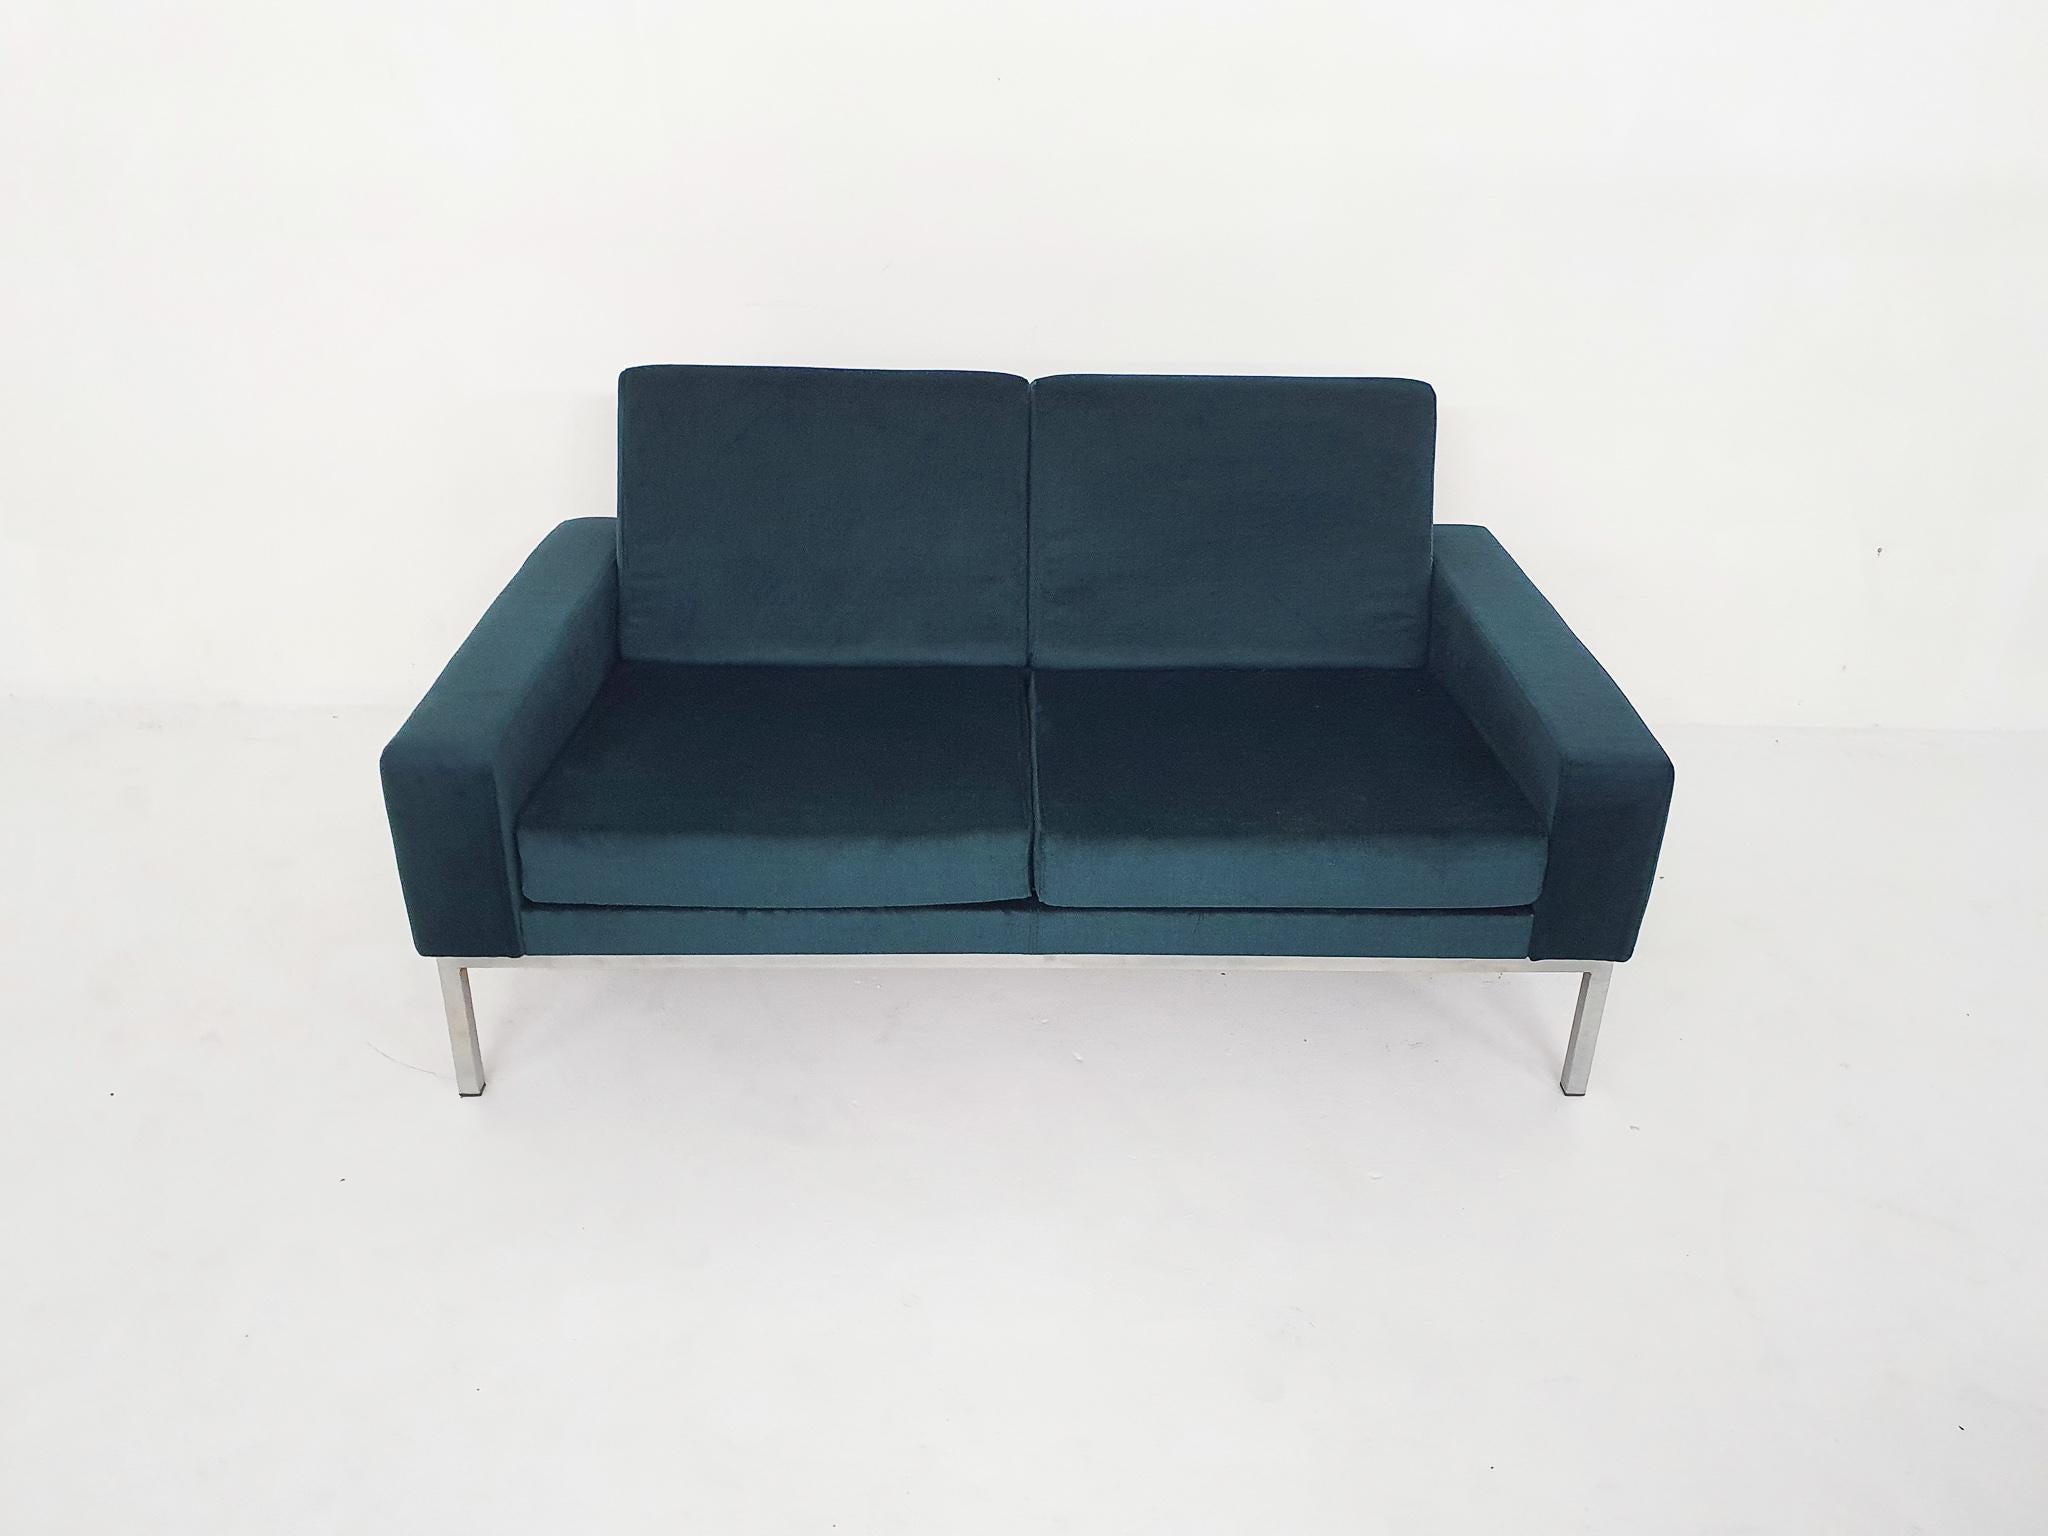 Mid-Century Modern Two-Seater Sofa Attrb to Gelderland, The Netherlands 1950's For Sale